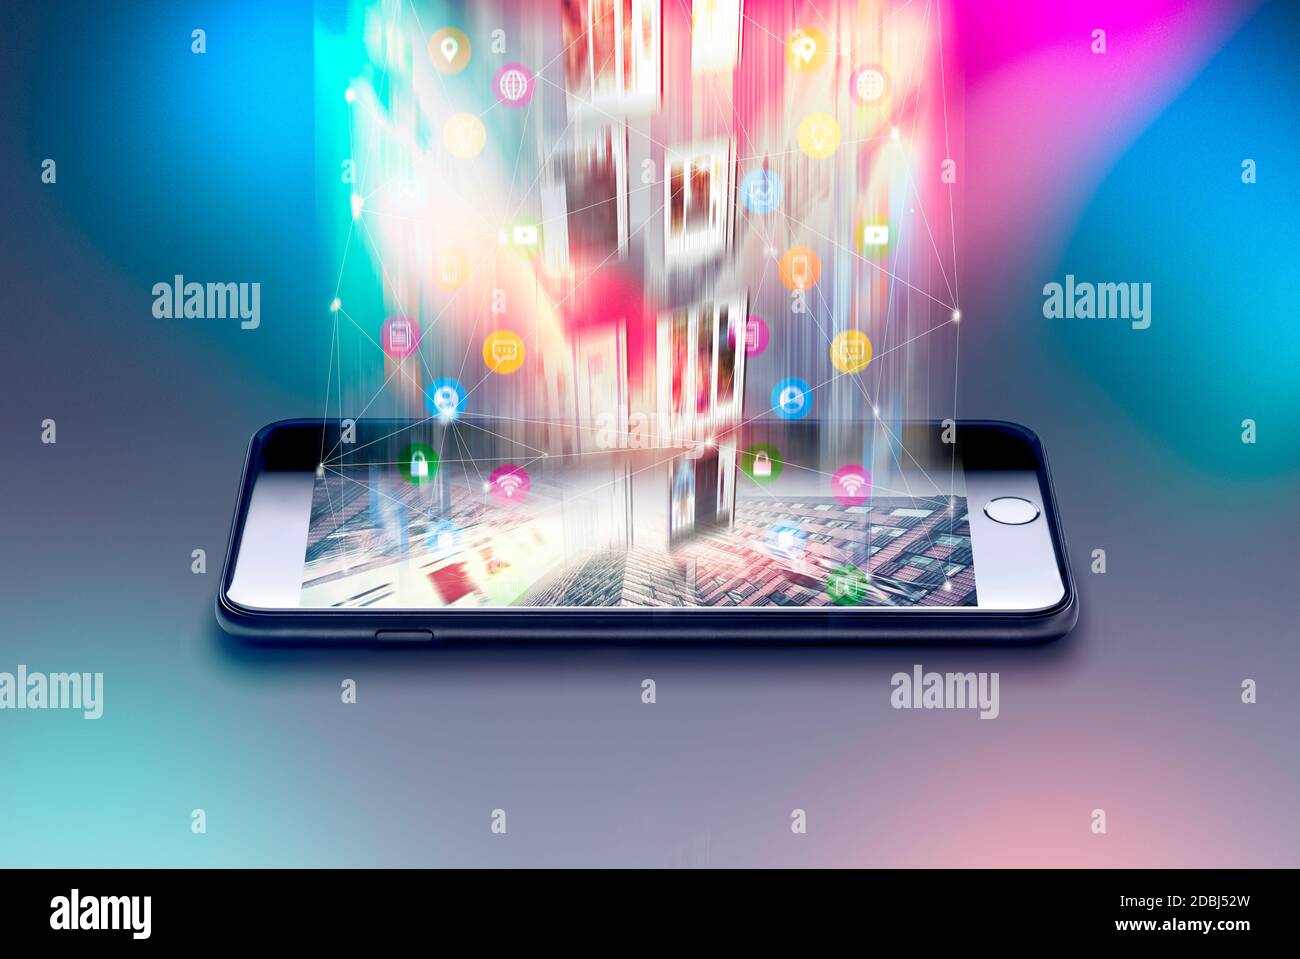 Encrypted mobile data from a smartphone, 5G steaming service Creative abstract mobile internet web communication security and safety business commerci Stock Photo